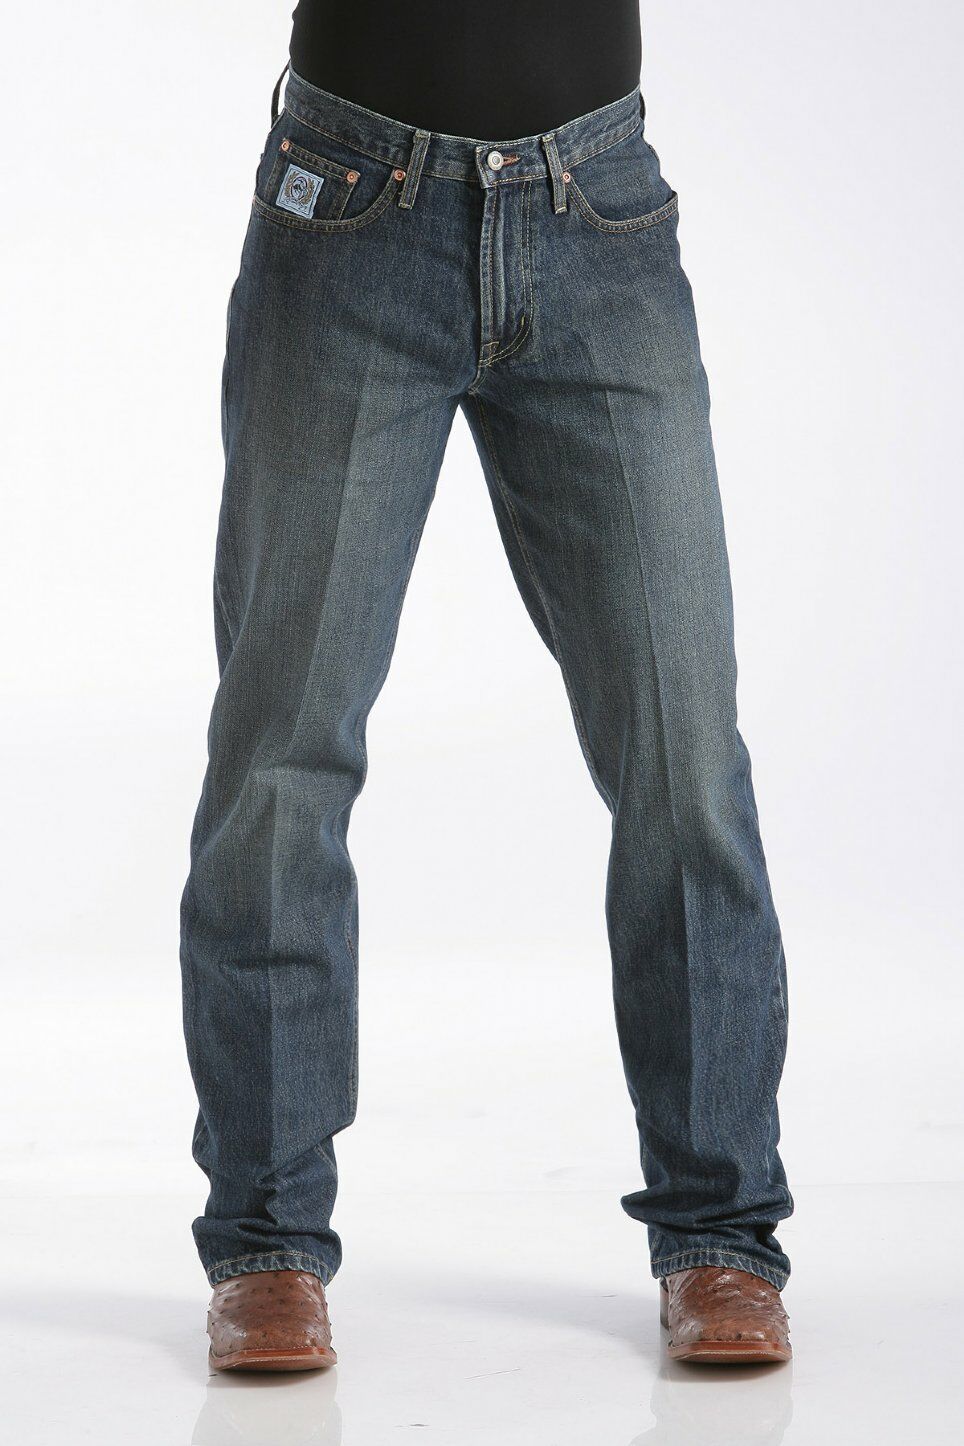 Mens Relaxed Fit White Label Jean - Dark Stonewash